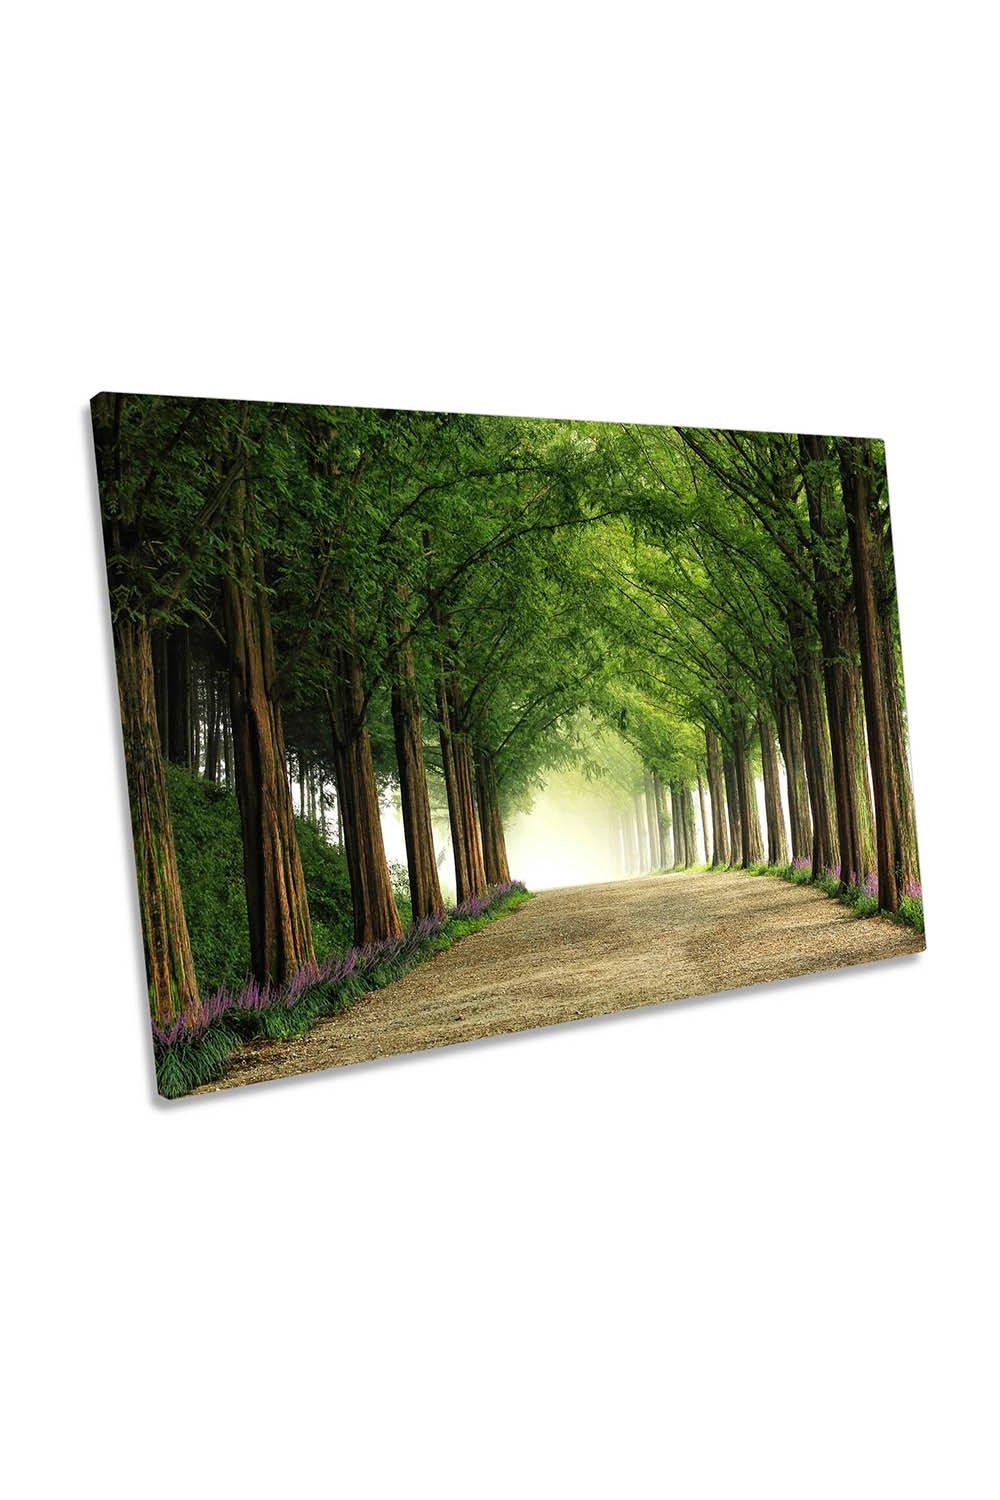 Metasequoia Road Green Trees Pathway Canvas Wall Art Picture Print